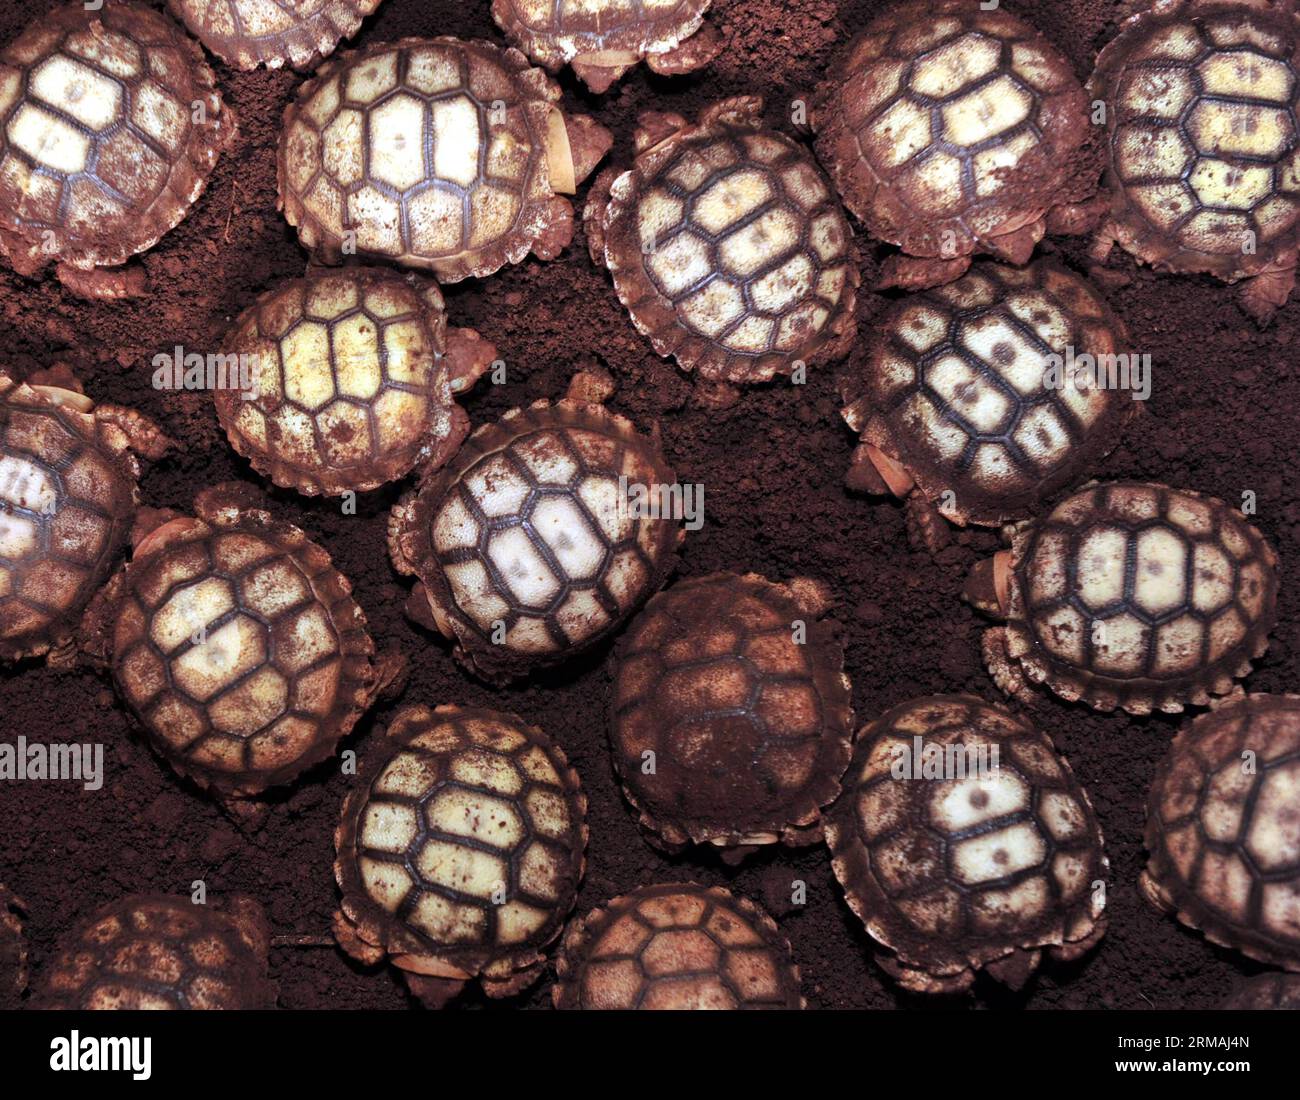 Sulcata tortoise (Centrochelys sulcata) hatchlings are seen at a cultivation center in Wenchang, south China s Hainan Province, July 11, 2014. An adult Sulcata tortoise (Centrochelys sulcata) is seen at a cultivation center in Wenchang, south China s Hainan Province, July 11, 2014. A chelonian cultivation center in Wenchang has succeeded in hatching over 1,000 Sulcata tortoises. The new hatchlings were given birth to by adults imported from Africa. The sulcata tortoise, which originally lives near the seashores on the southwestern edge of the Sahara desert, is an endangered species on the IUCN Stock Photo